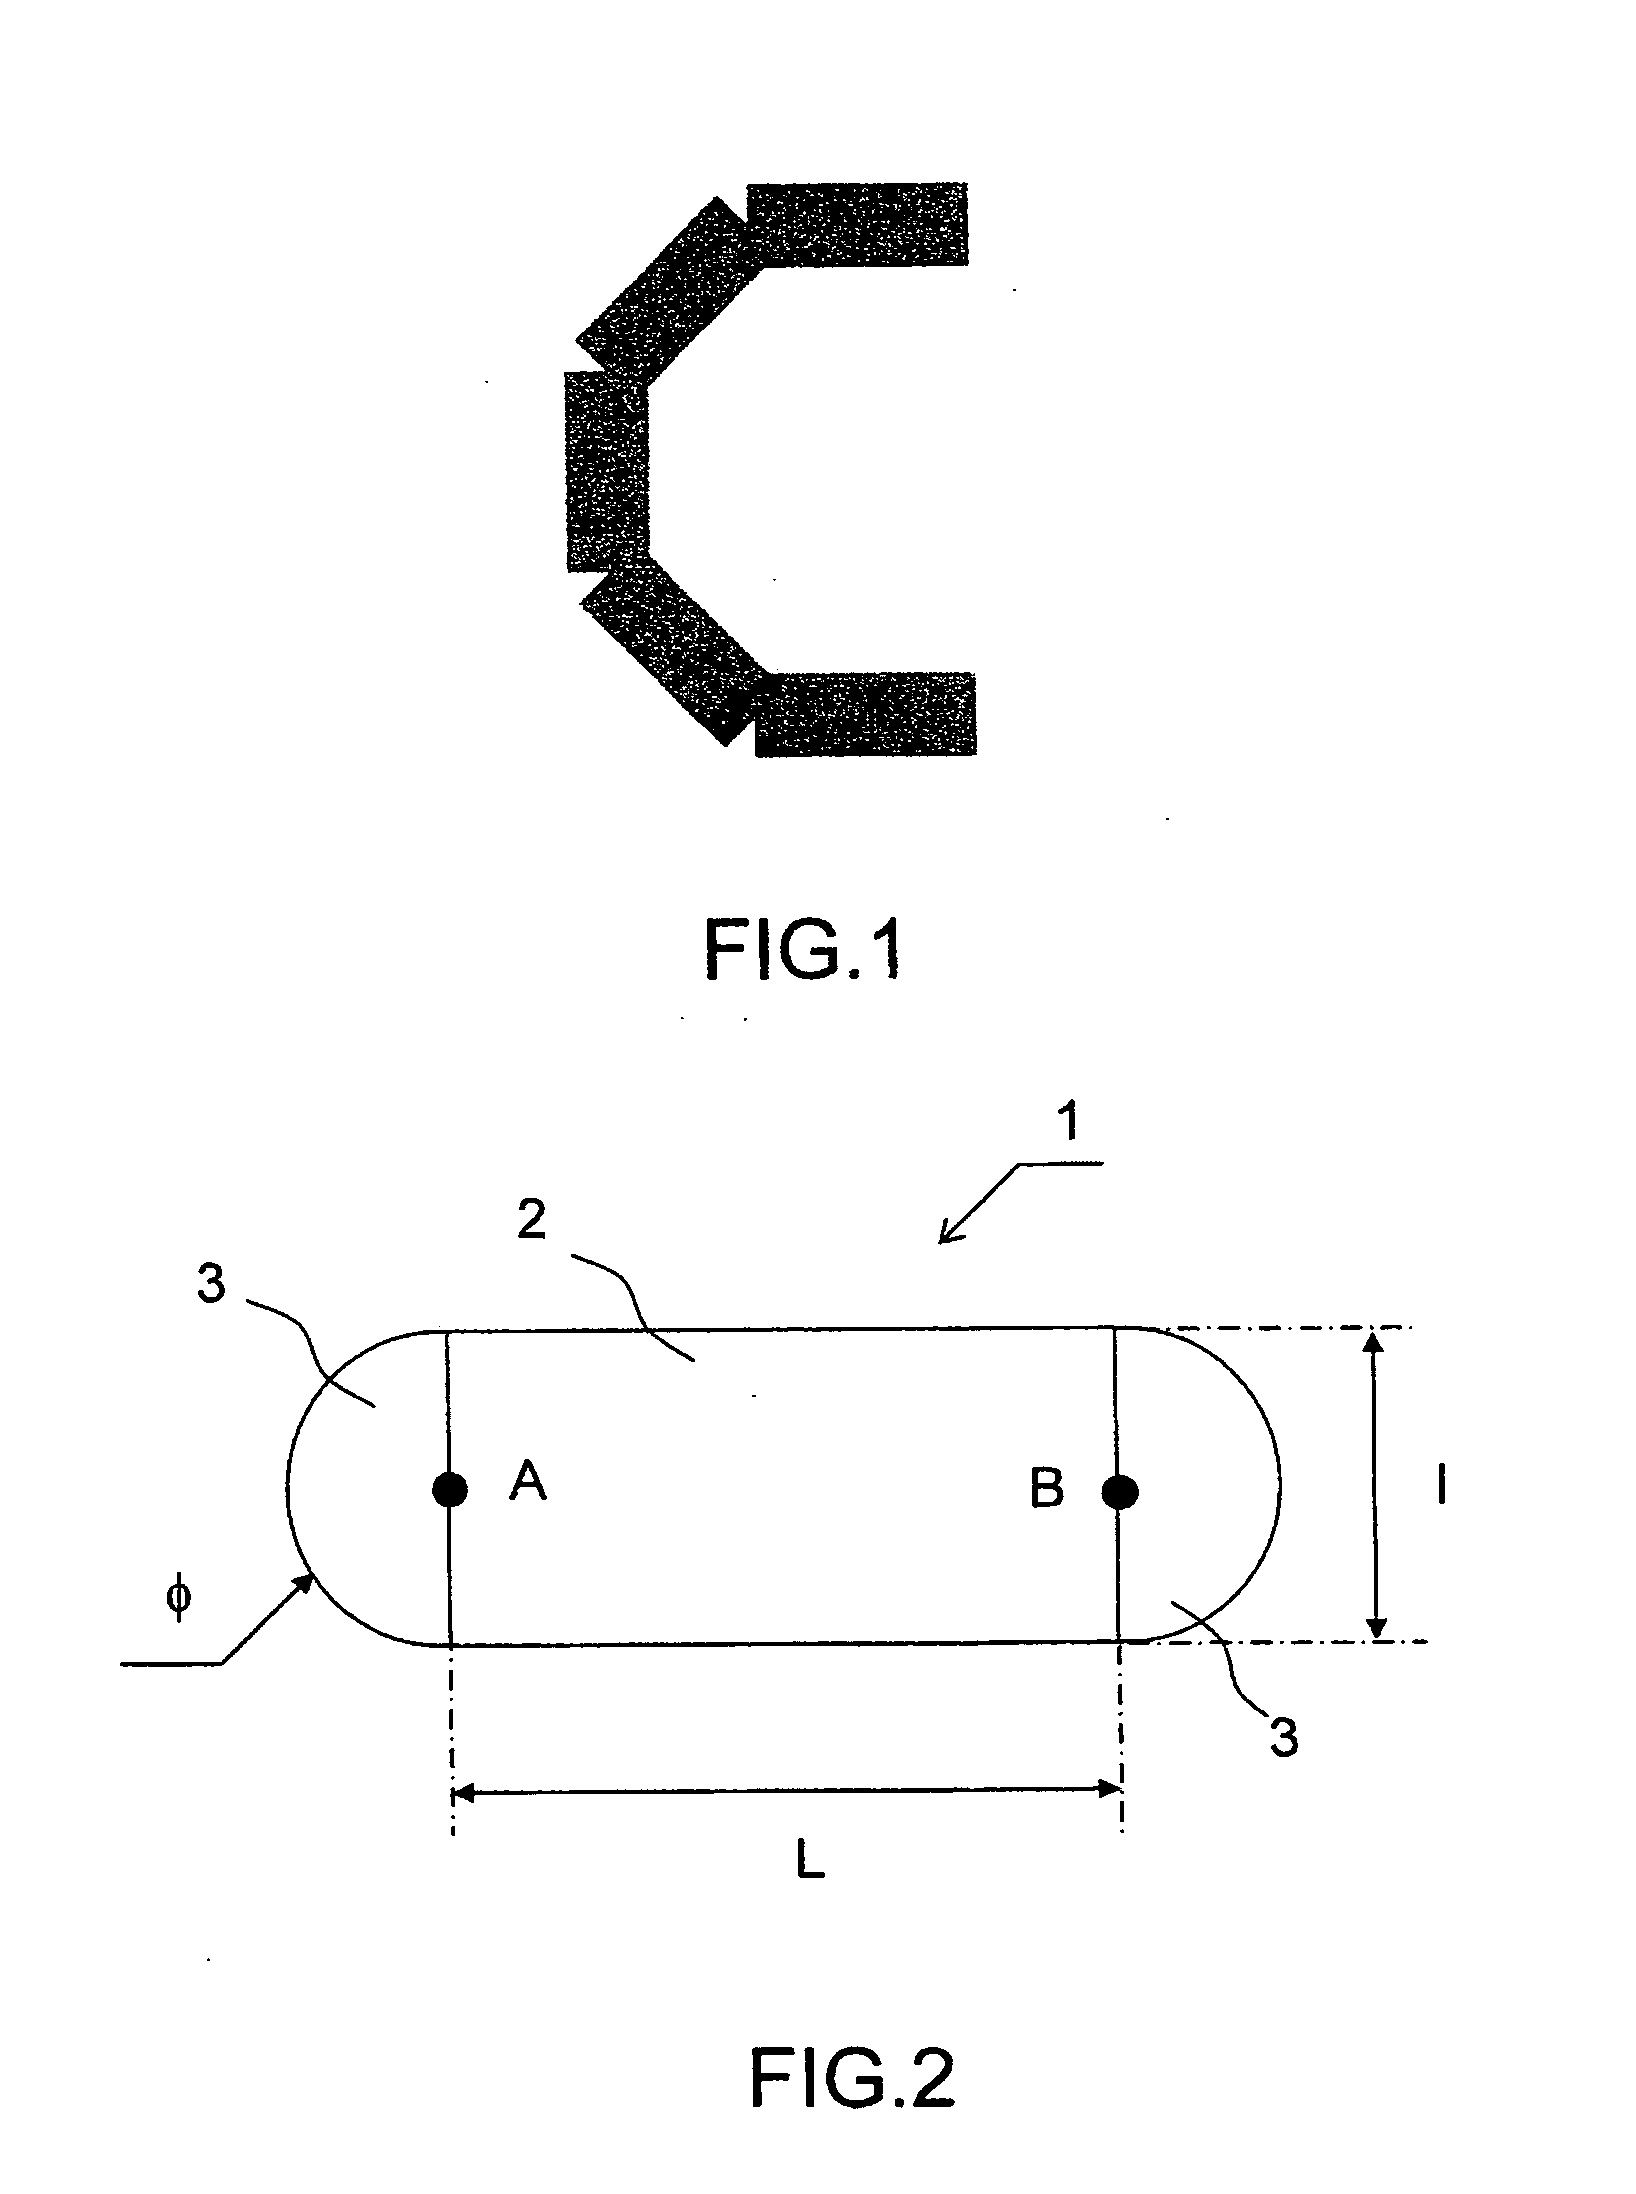 Method for Graphically Generating Rounded-End Lines